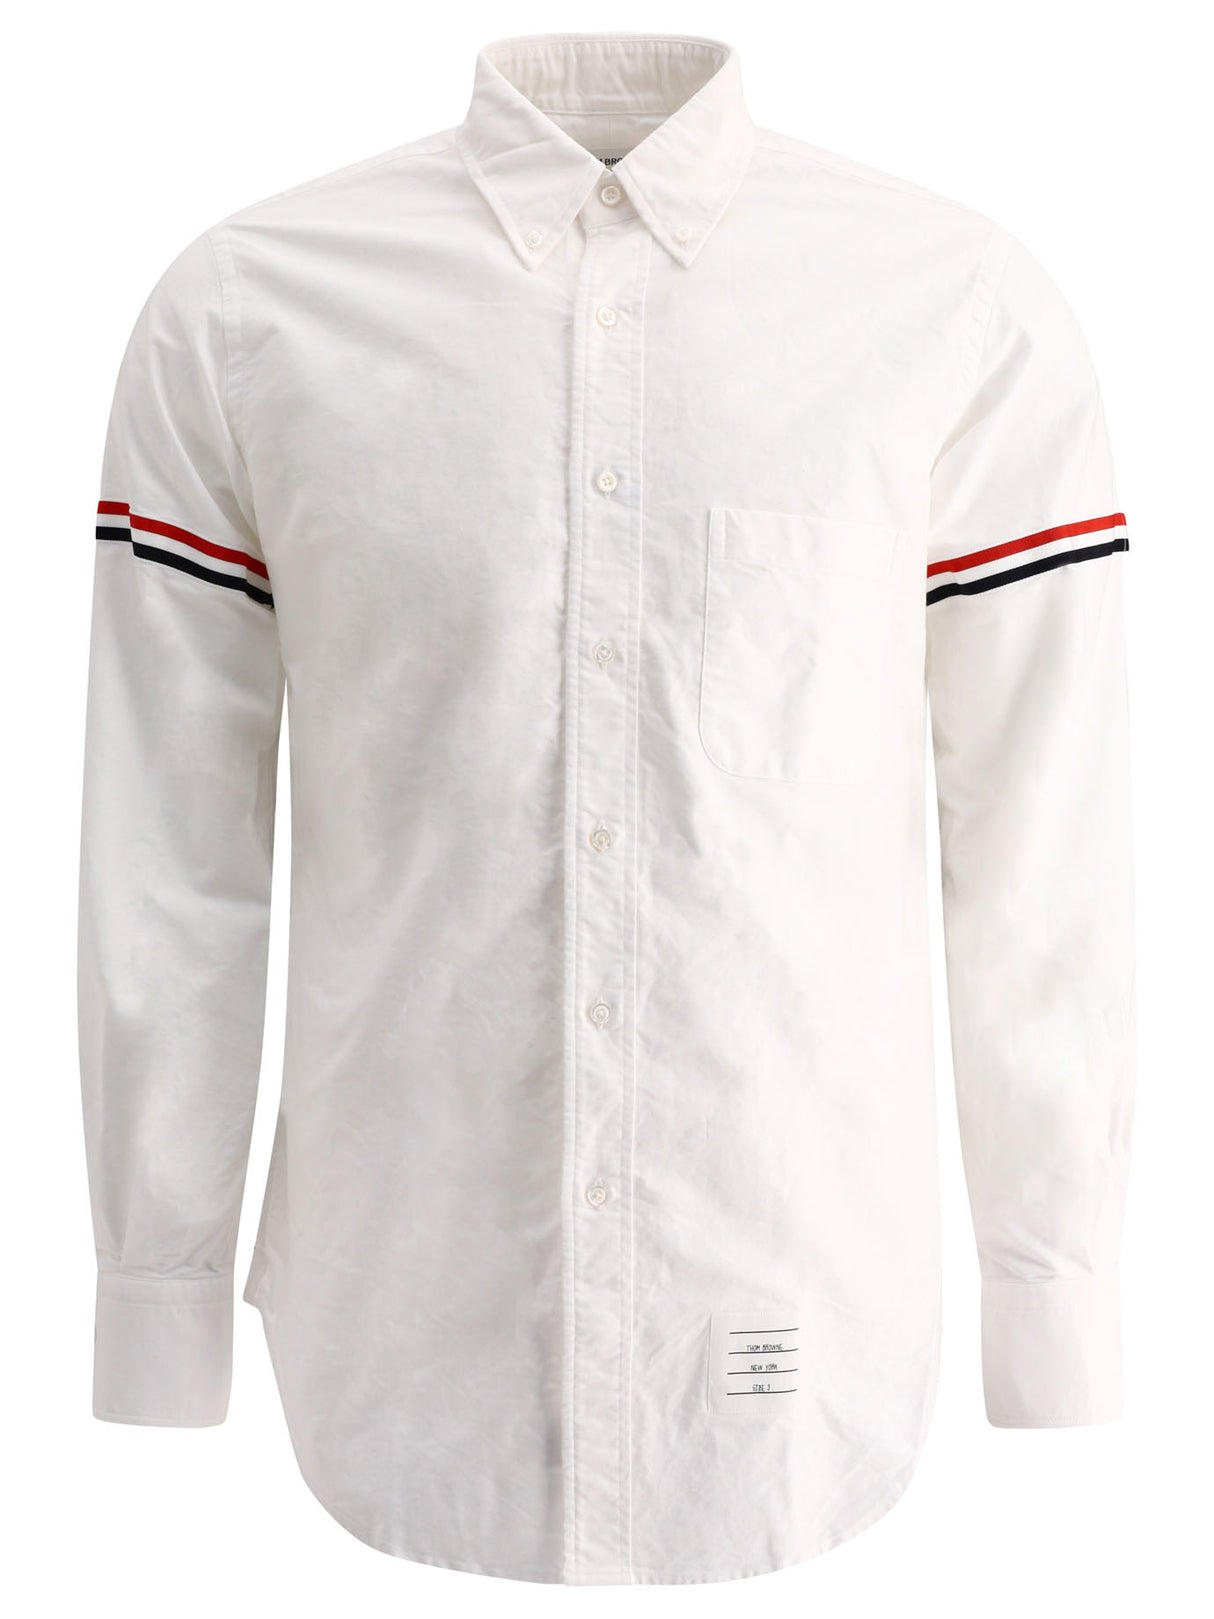 THOM BROWNE Classic White Cotton Shirt for Men